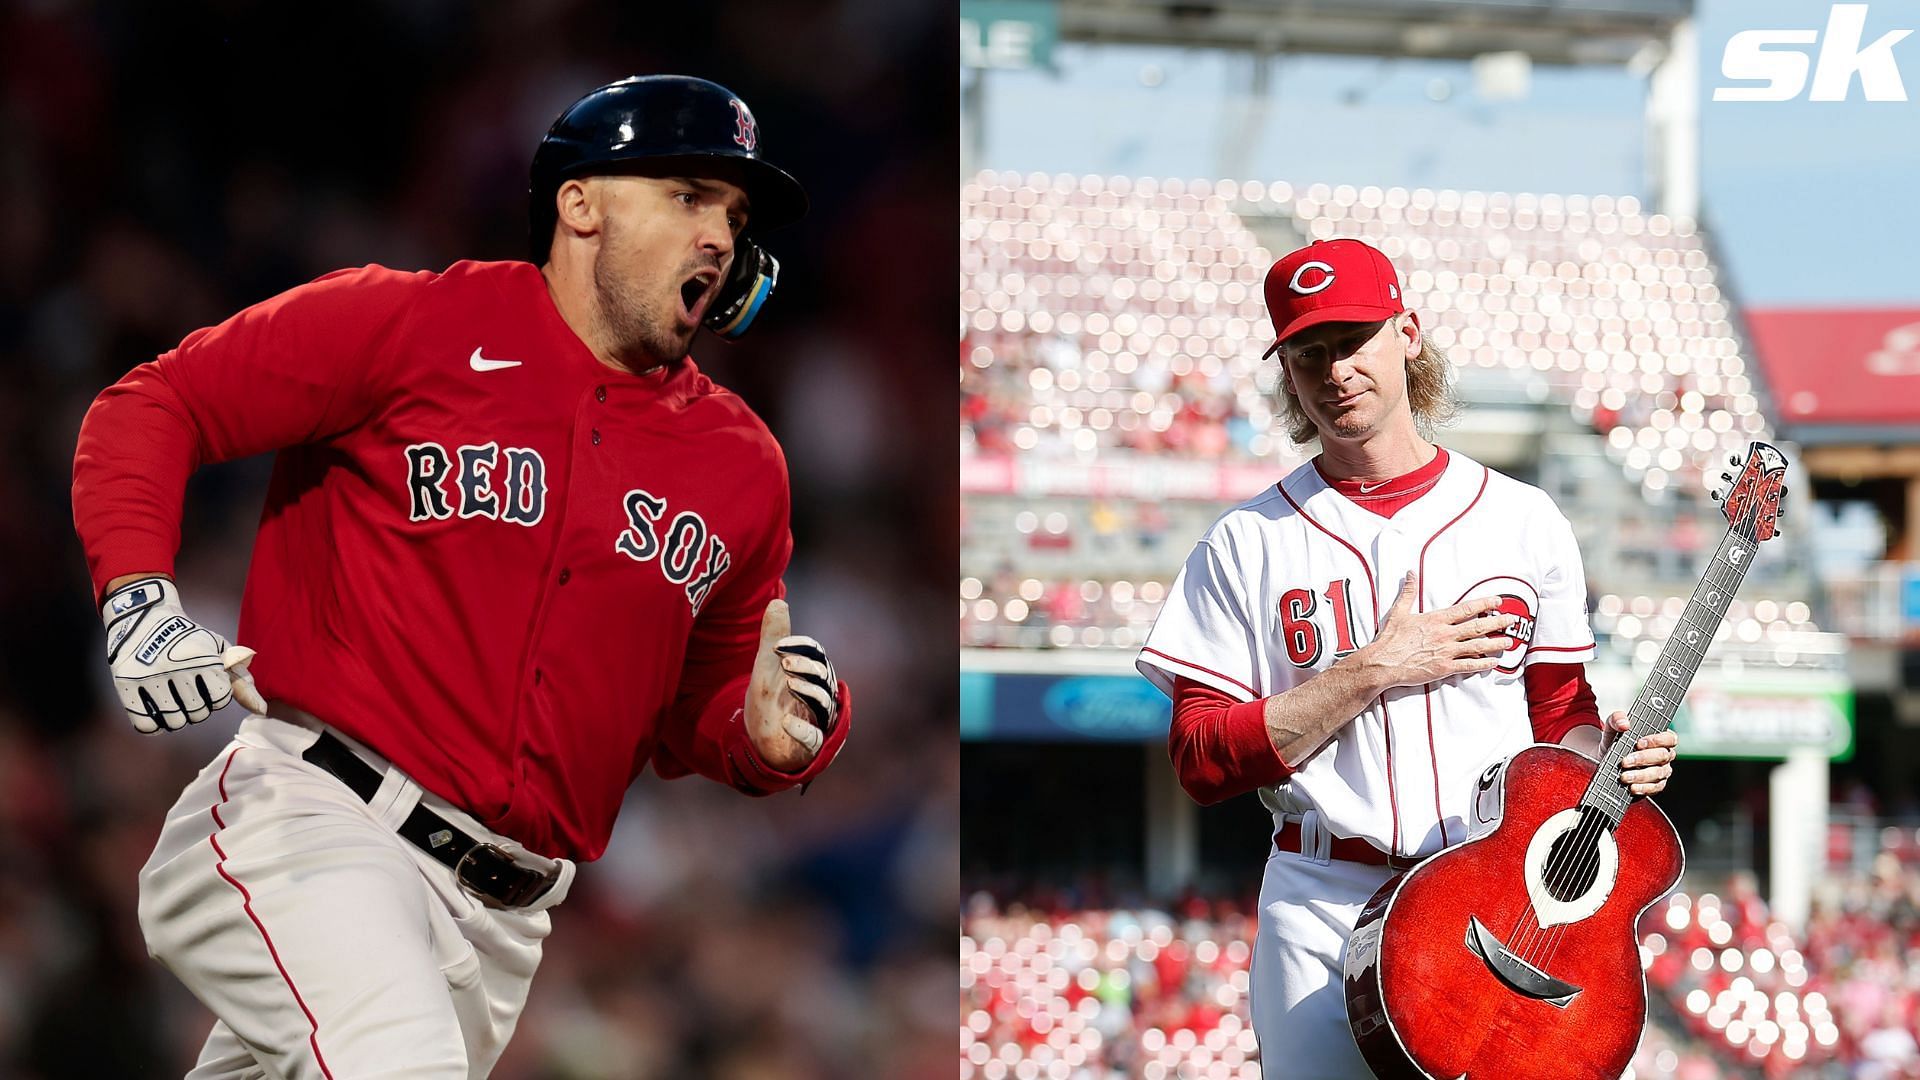 Which Red Sox players have also played for the Reds? MLB